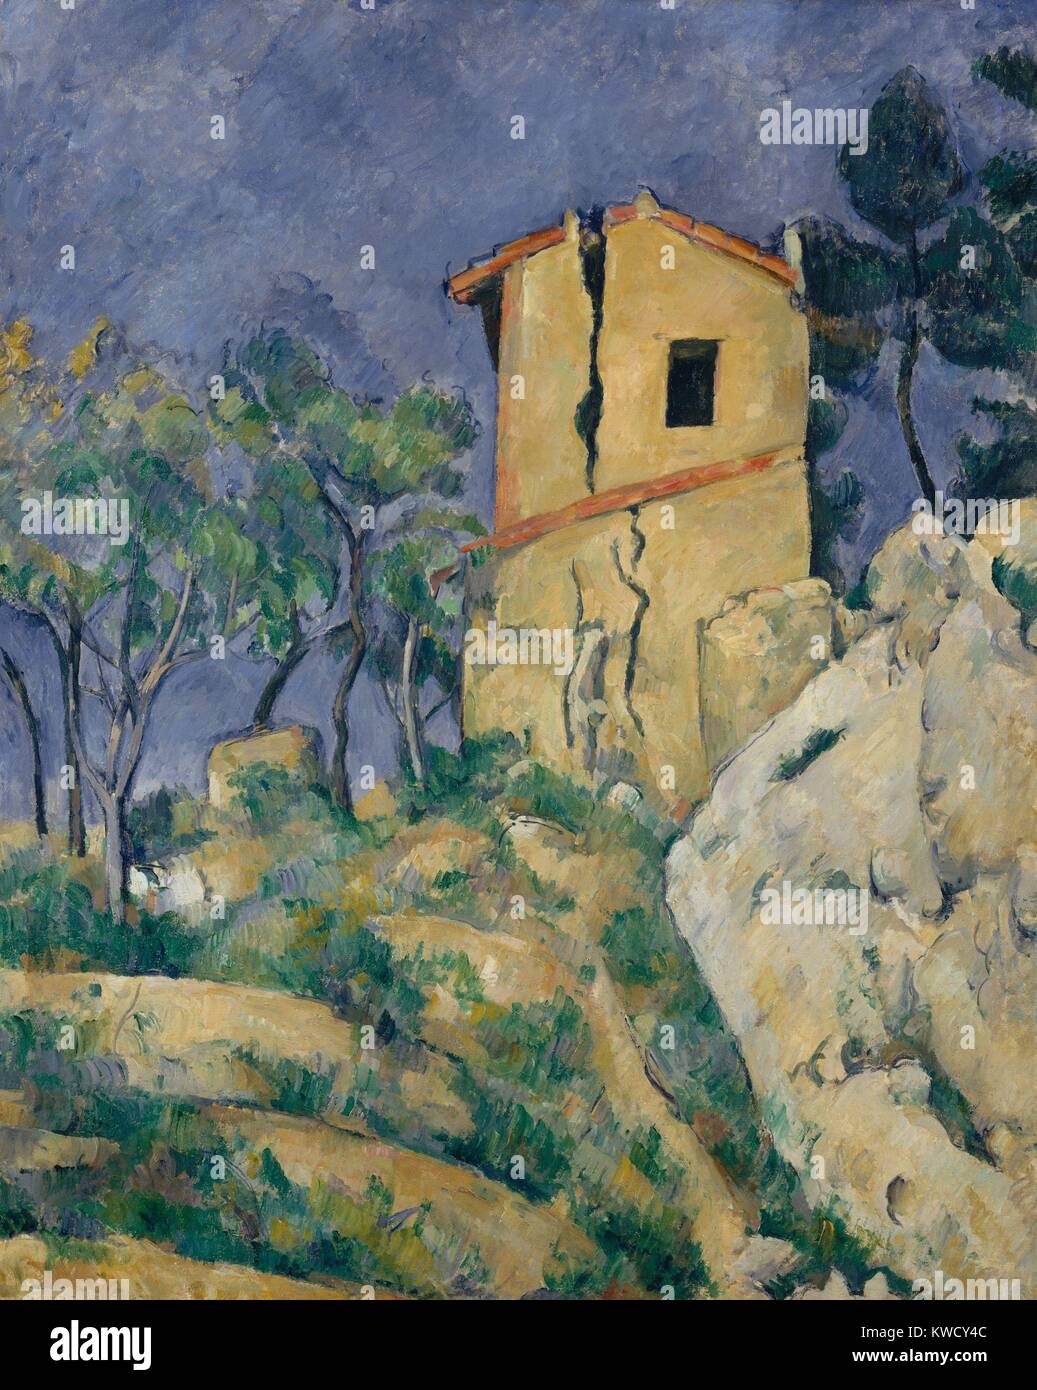 House with the Cracked Walls, by Paul Cezanne, 1892-94, French Post-Impressionist oil painting. This abandoned house was near his Aix-en-Provence studio (BSLOC 2017 5 11) Stock Photo